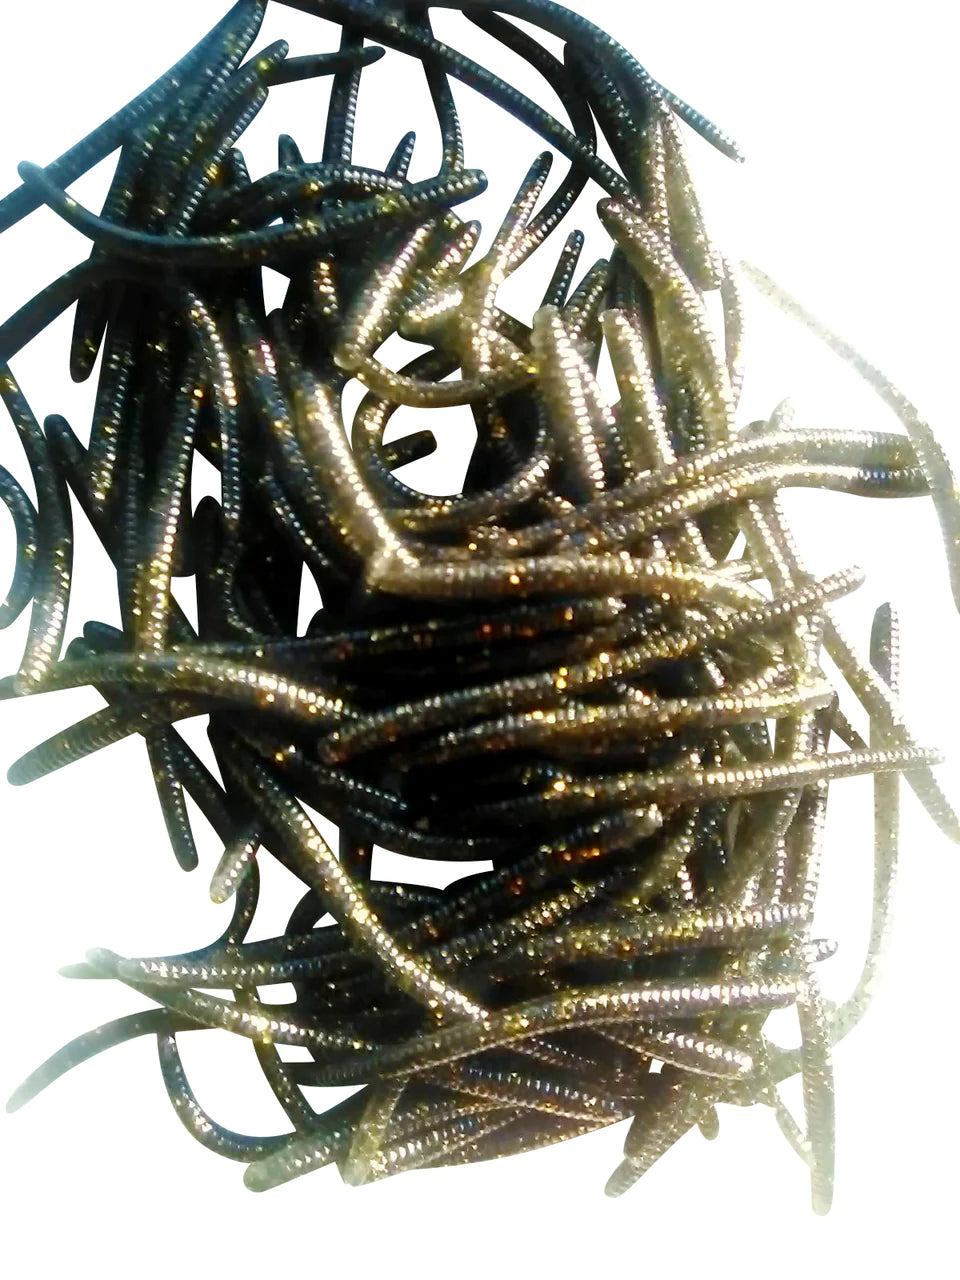 Unscented custom trout worms